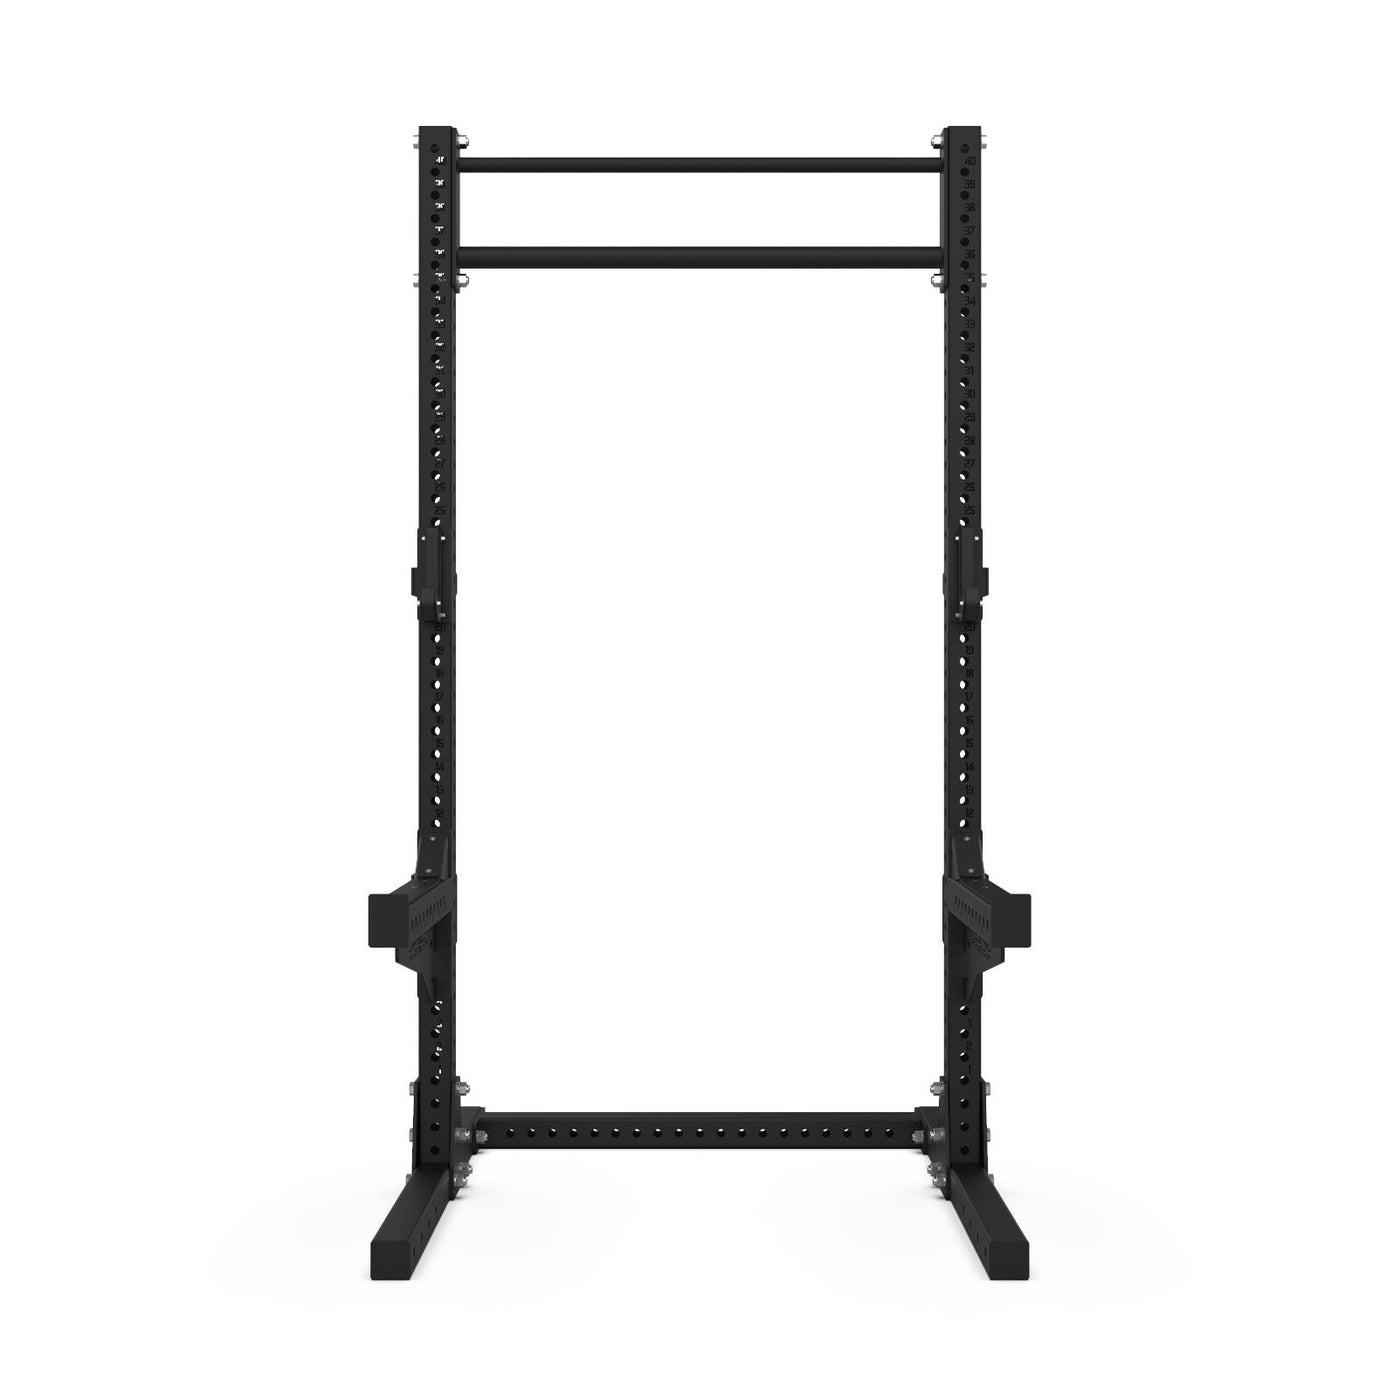 Industrial Athletic Squat Stand